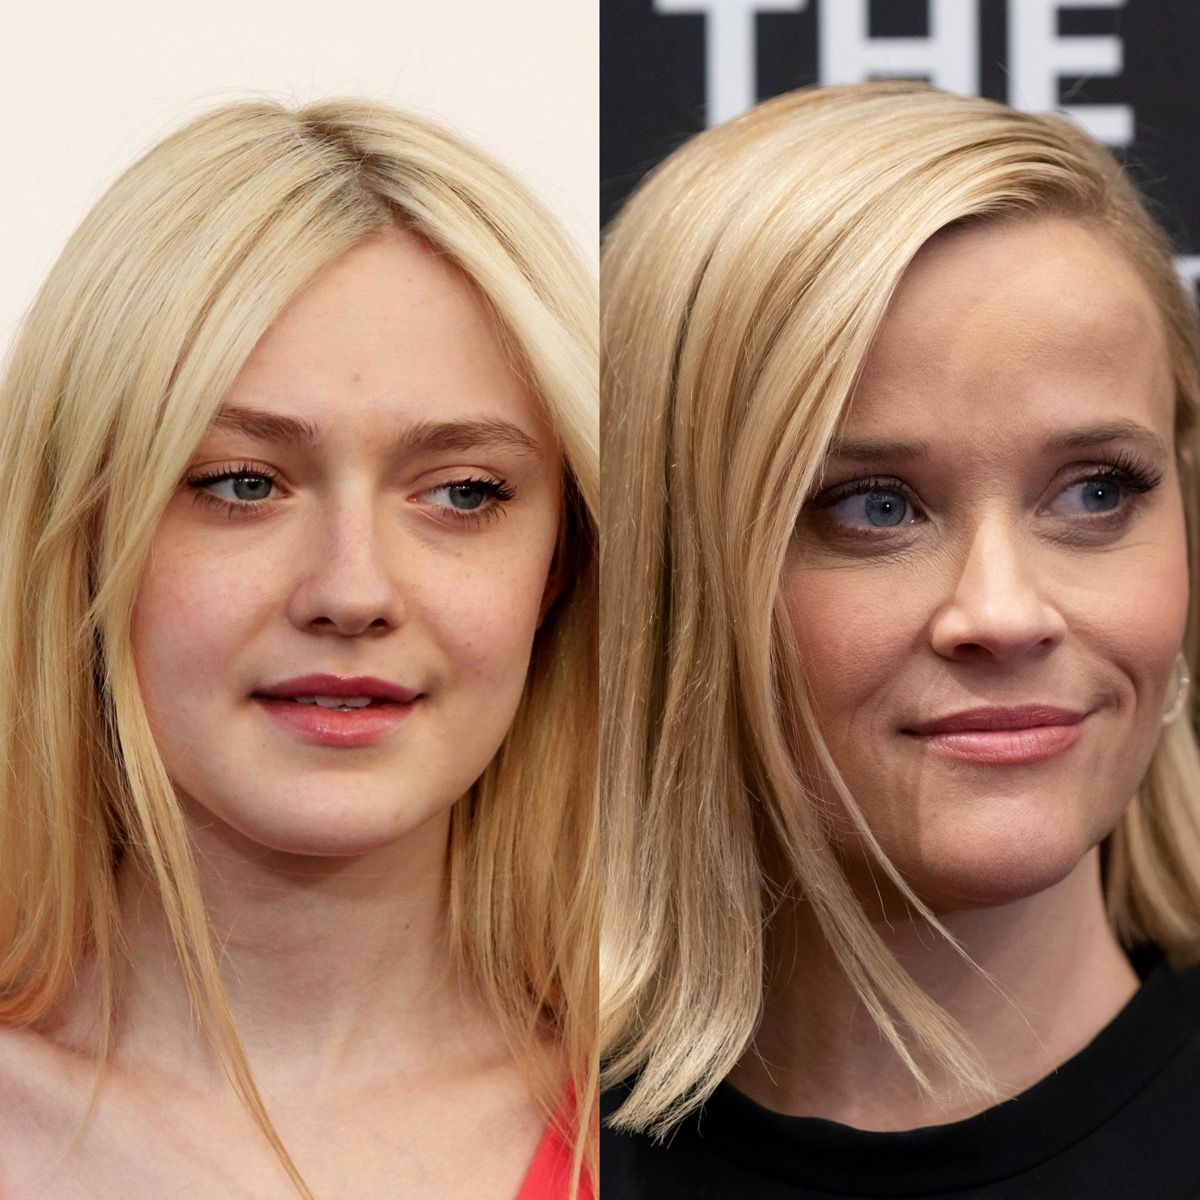 Dakota Fanning a Reese Witherspoon